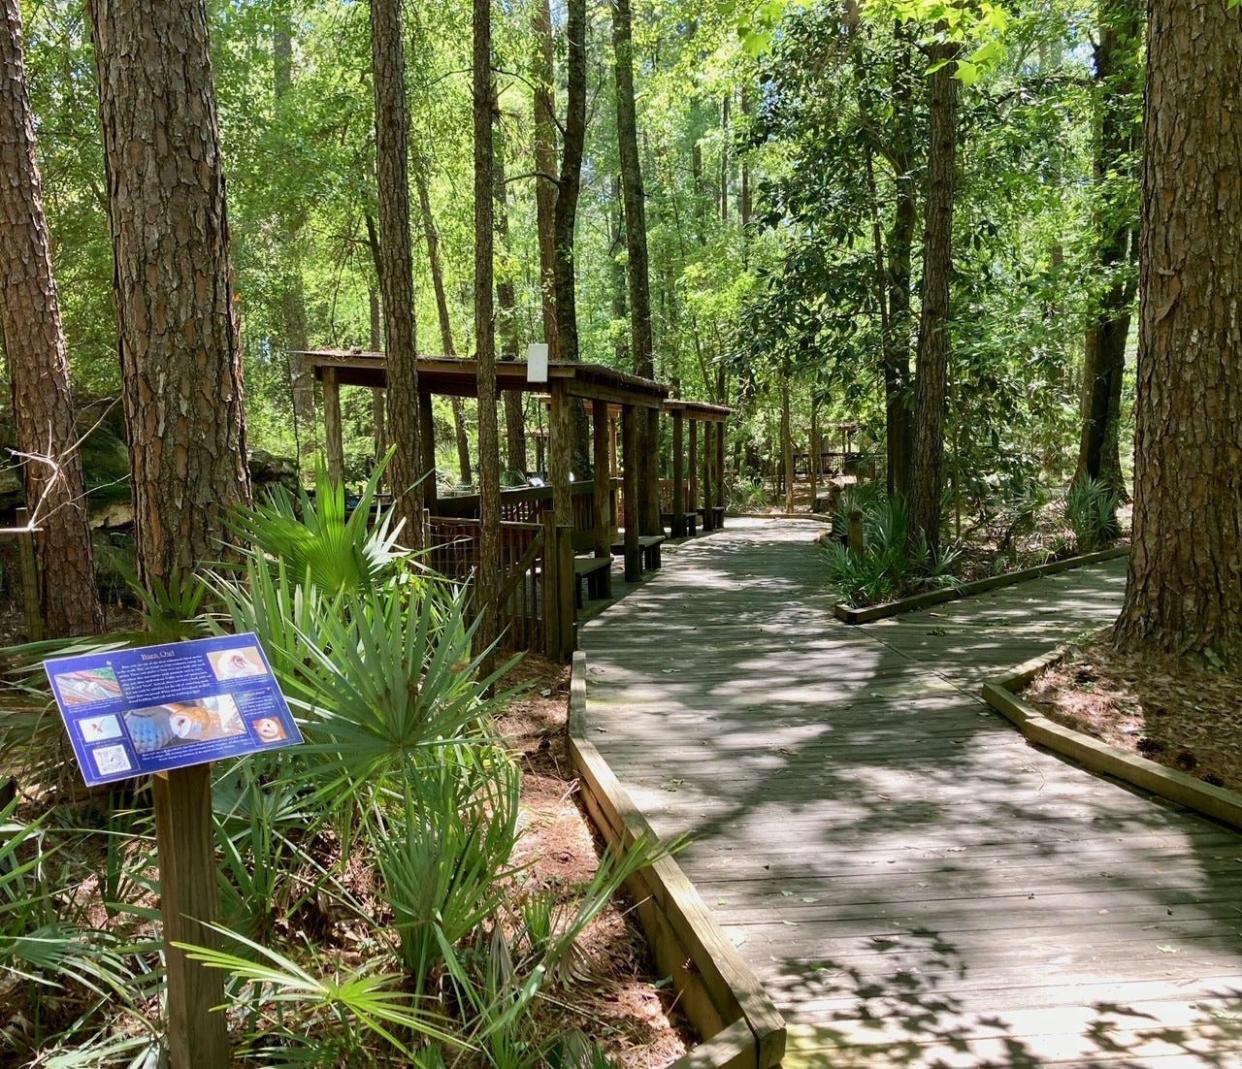 The self-guided path that leads visitors to raptor enclosures and throughout the different forest and wetland habitats within the education center